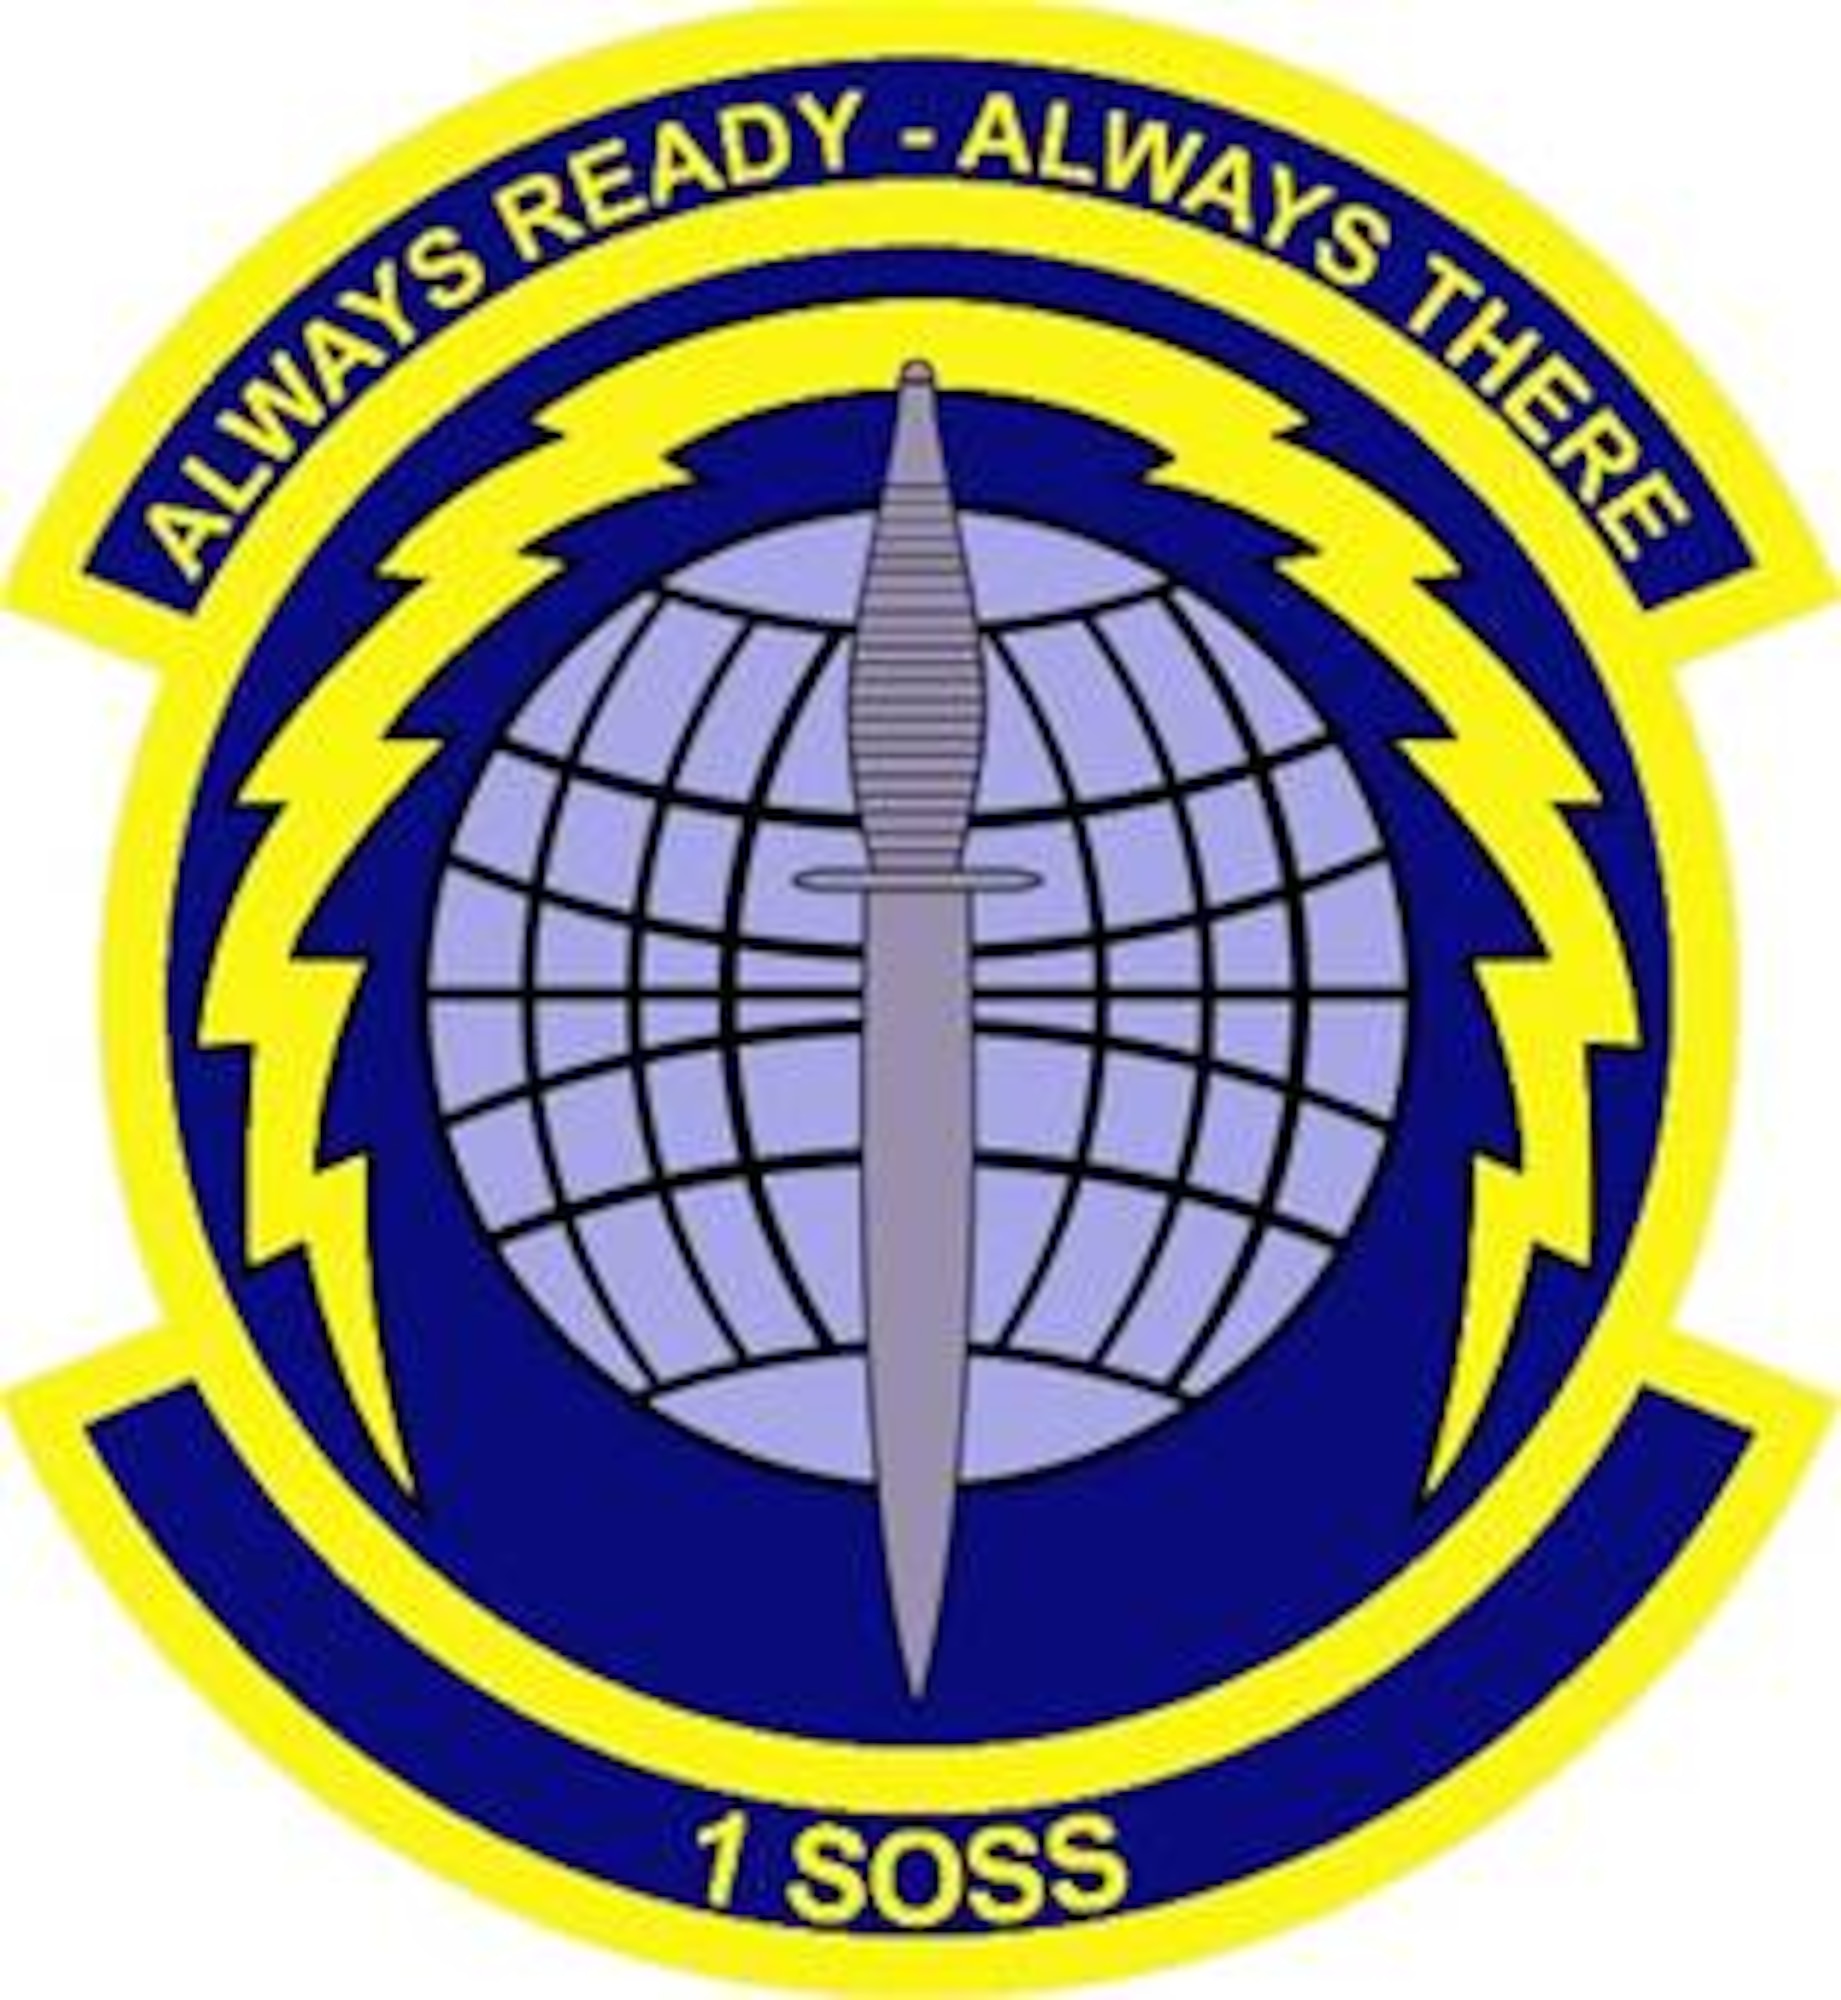 The 1st Special Operations Support Squadron emblem significance: Blue alludes to the sky, the primary theater of Air Force operations. Yellow refers to the sun and the excellence required of Air Force personnel. The sphere in the center of the emblem represents the unit's worldwide commitment to support special operations. The lightning bolt surrounding the sphere alludes to unit's rapid response mission to employ forces anywhere around the world. The lightning bolt also represents the unit's responsibility in pursuit of excellence in providing command and control, planning, communications, intelligence, weather, airfield operations, and medical support in maintenance of AF Special Operations Forces. The dagger reflects the commitment by the unit to uphold the proud heritage of the air commandos.